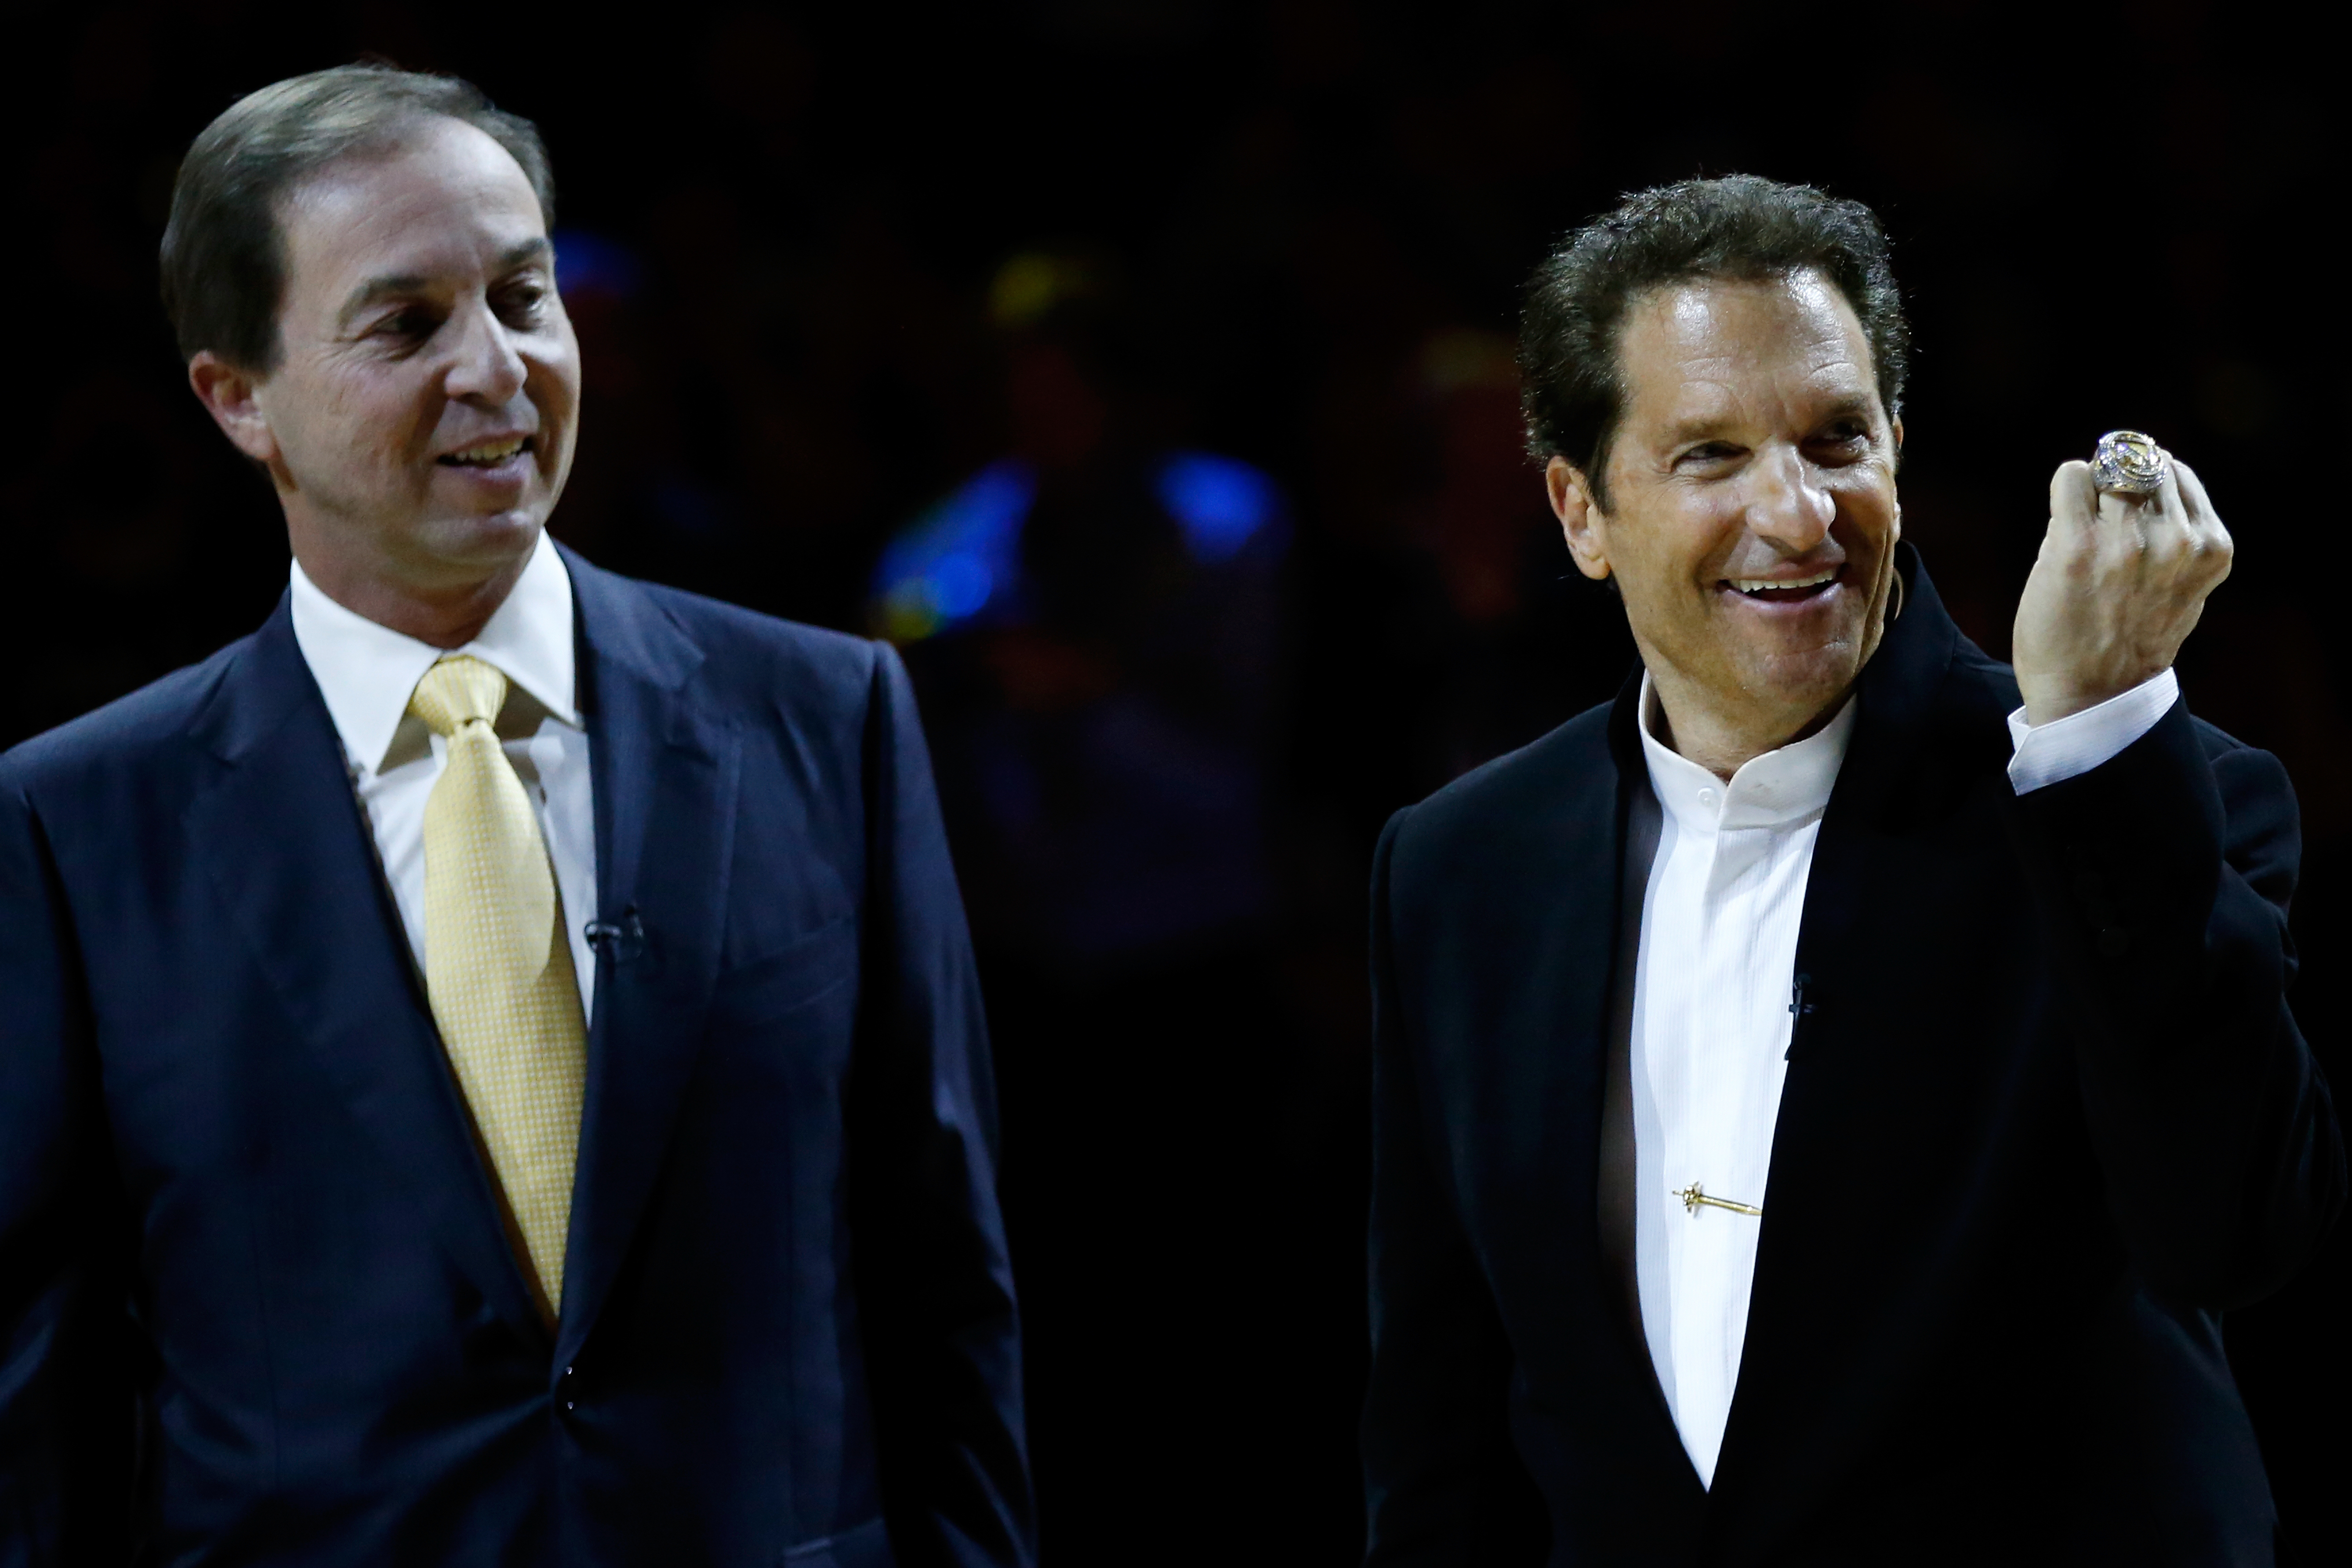 Warriors' co-owners Joe Lacob and Peter Guber are doing everything they can to finalize the franchise's move to San Francisco.